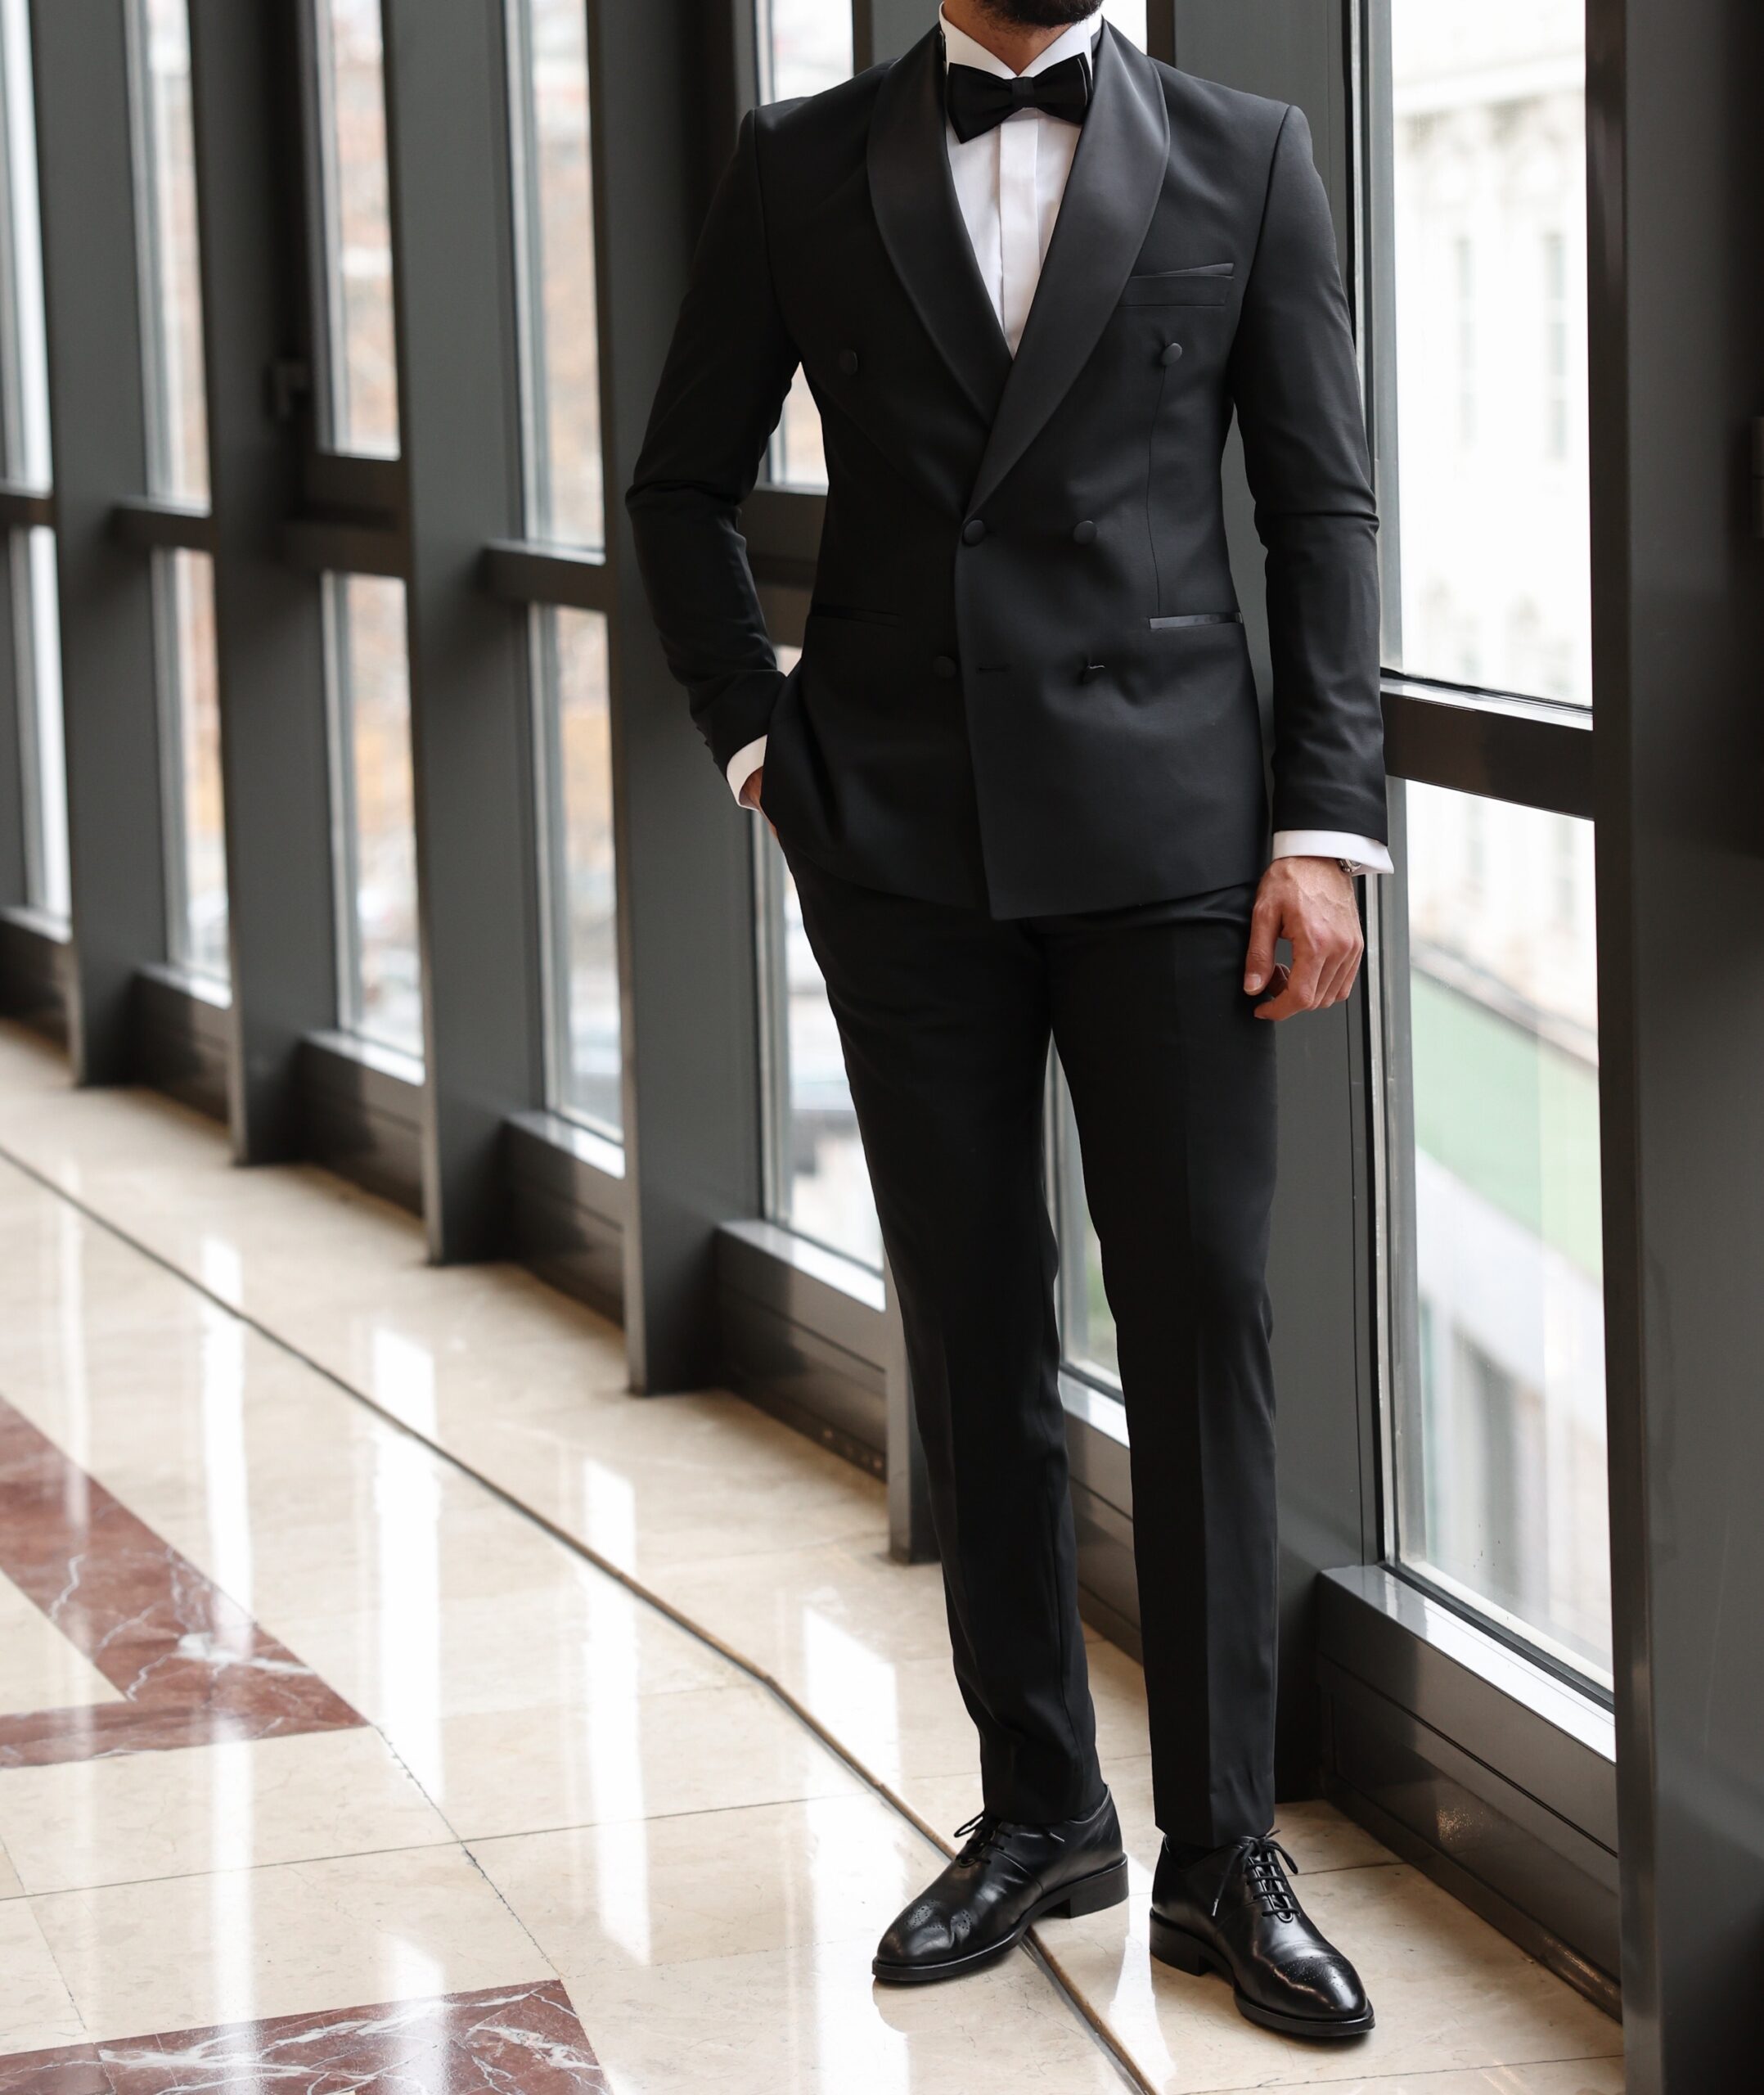 Black 2 piece Dinner Suit with Peak Lapel - New Arrival - Roderick Charles